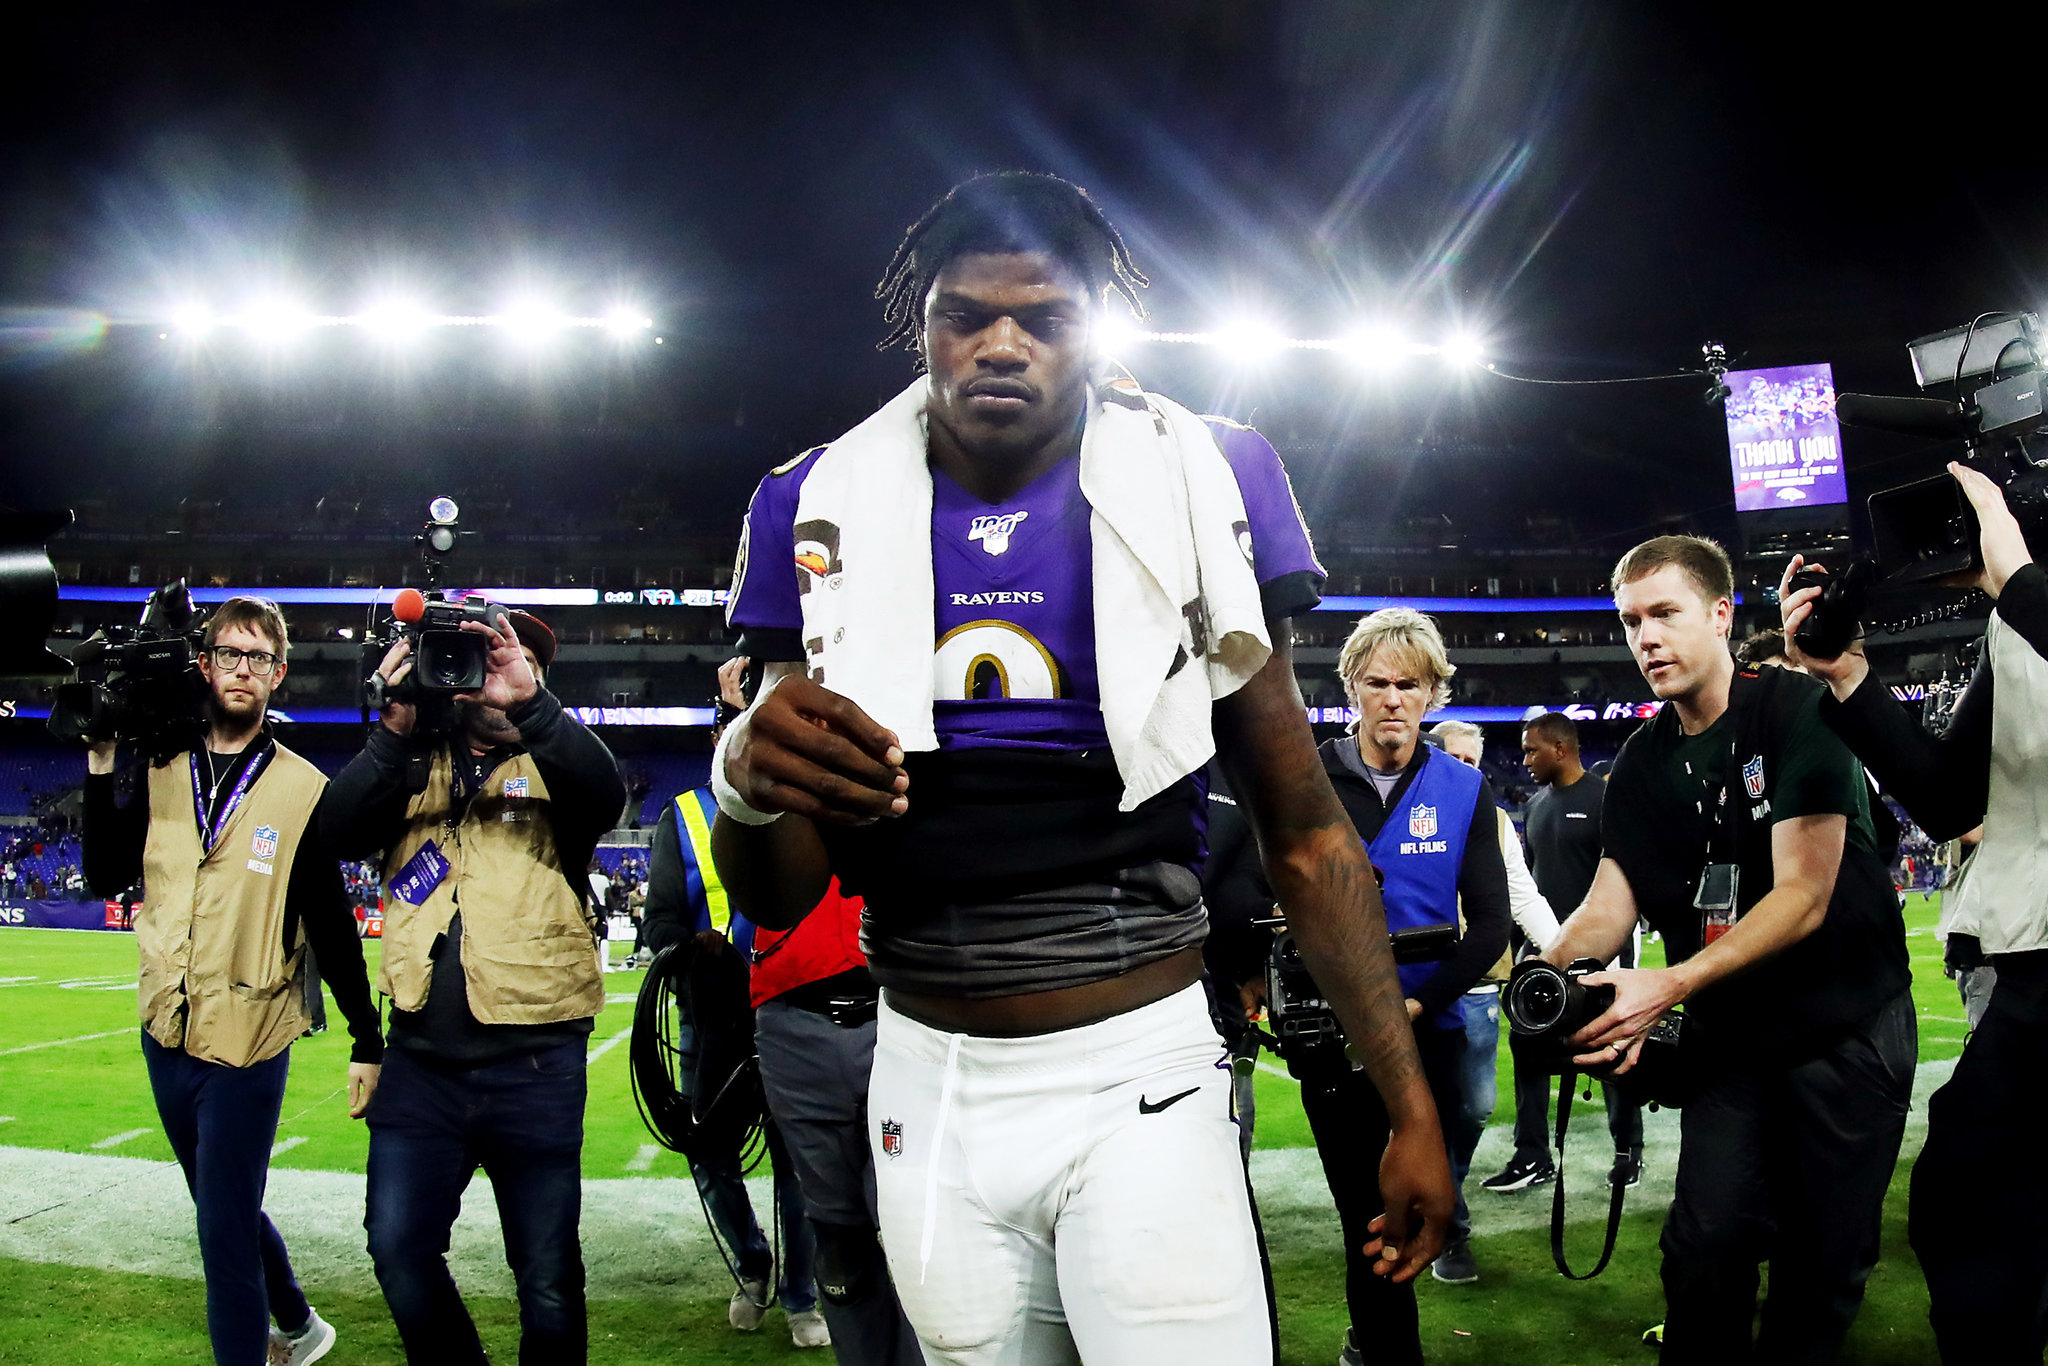 Lamar Jackson S Dream Season Ends With A Startling Loss The New